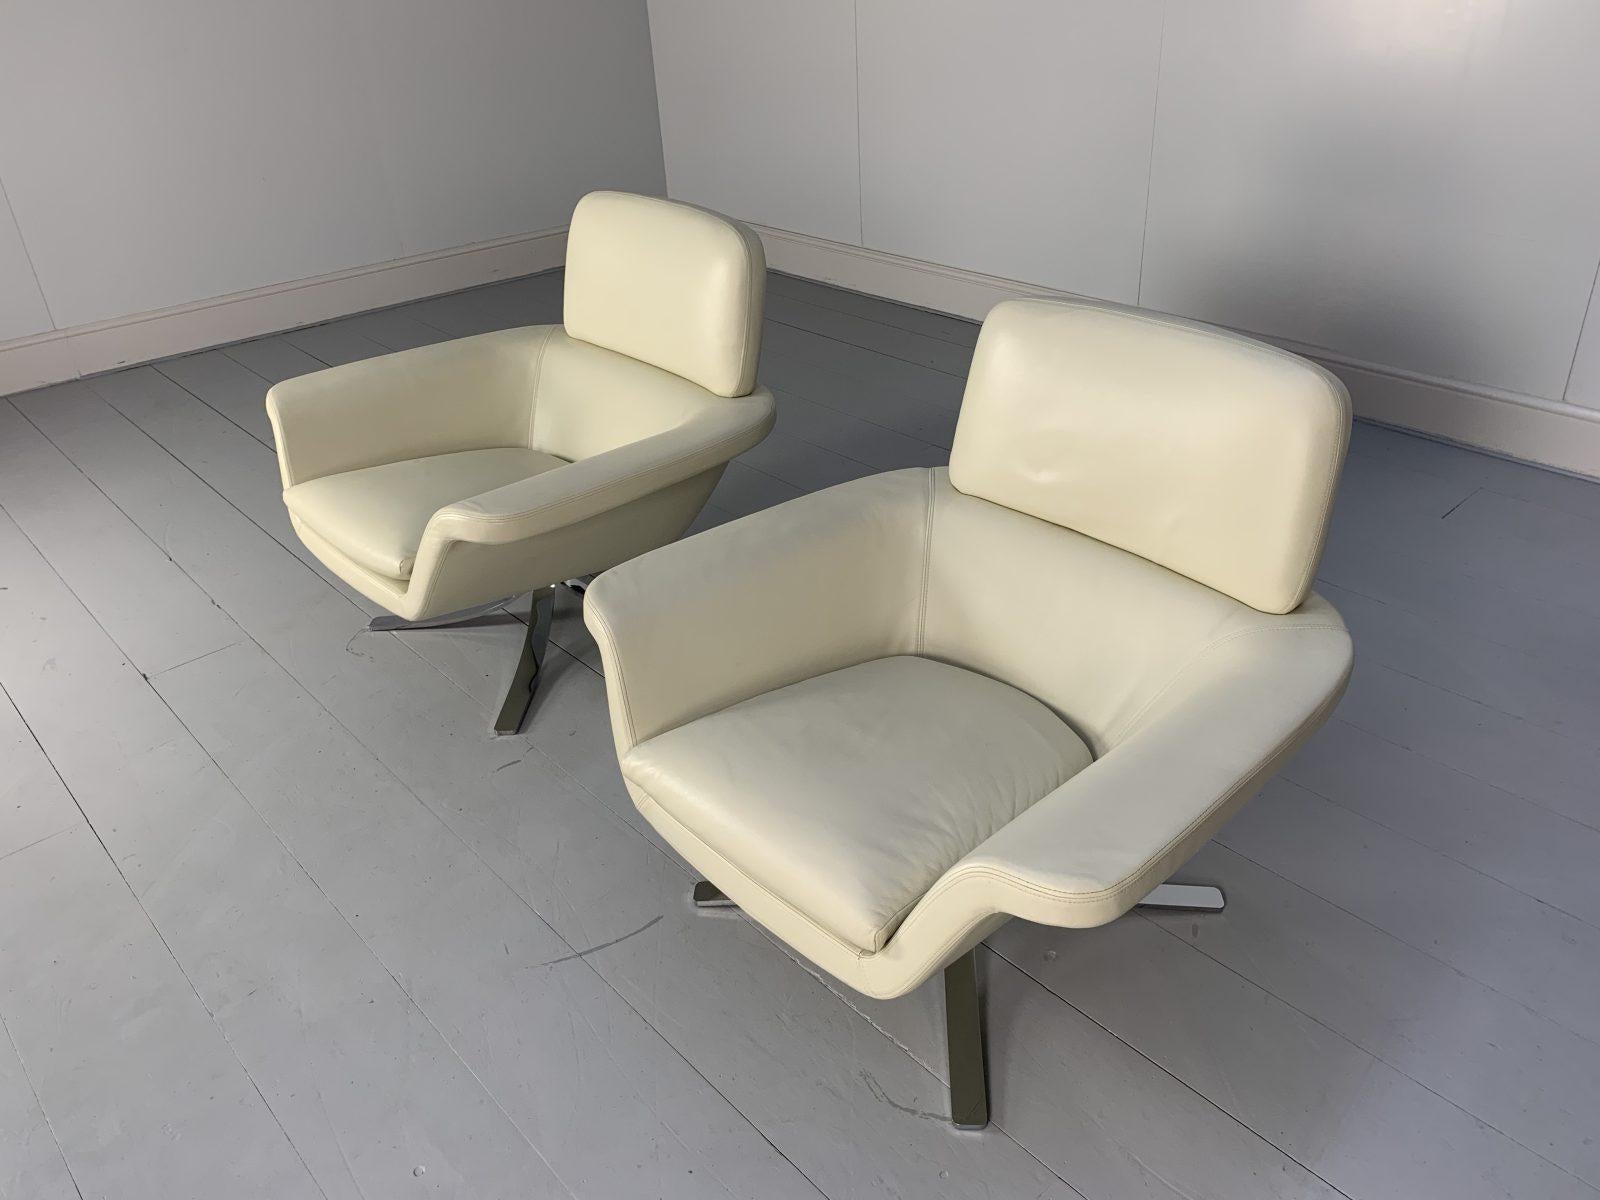 Minotti “Blake Soft” Armchairs, in Ivory Leather 4